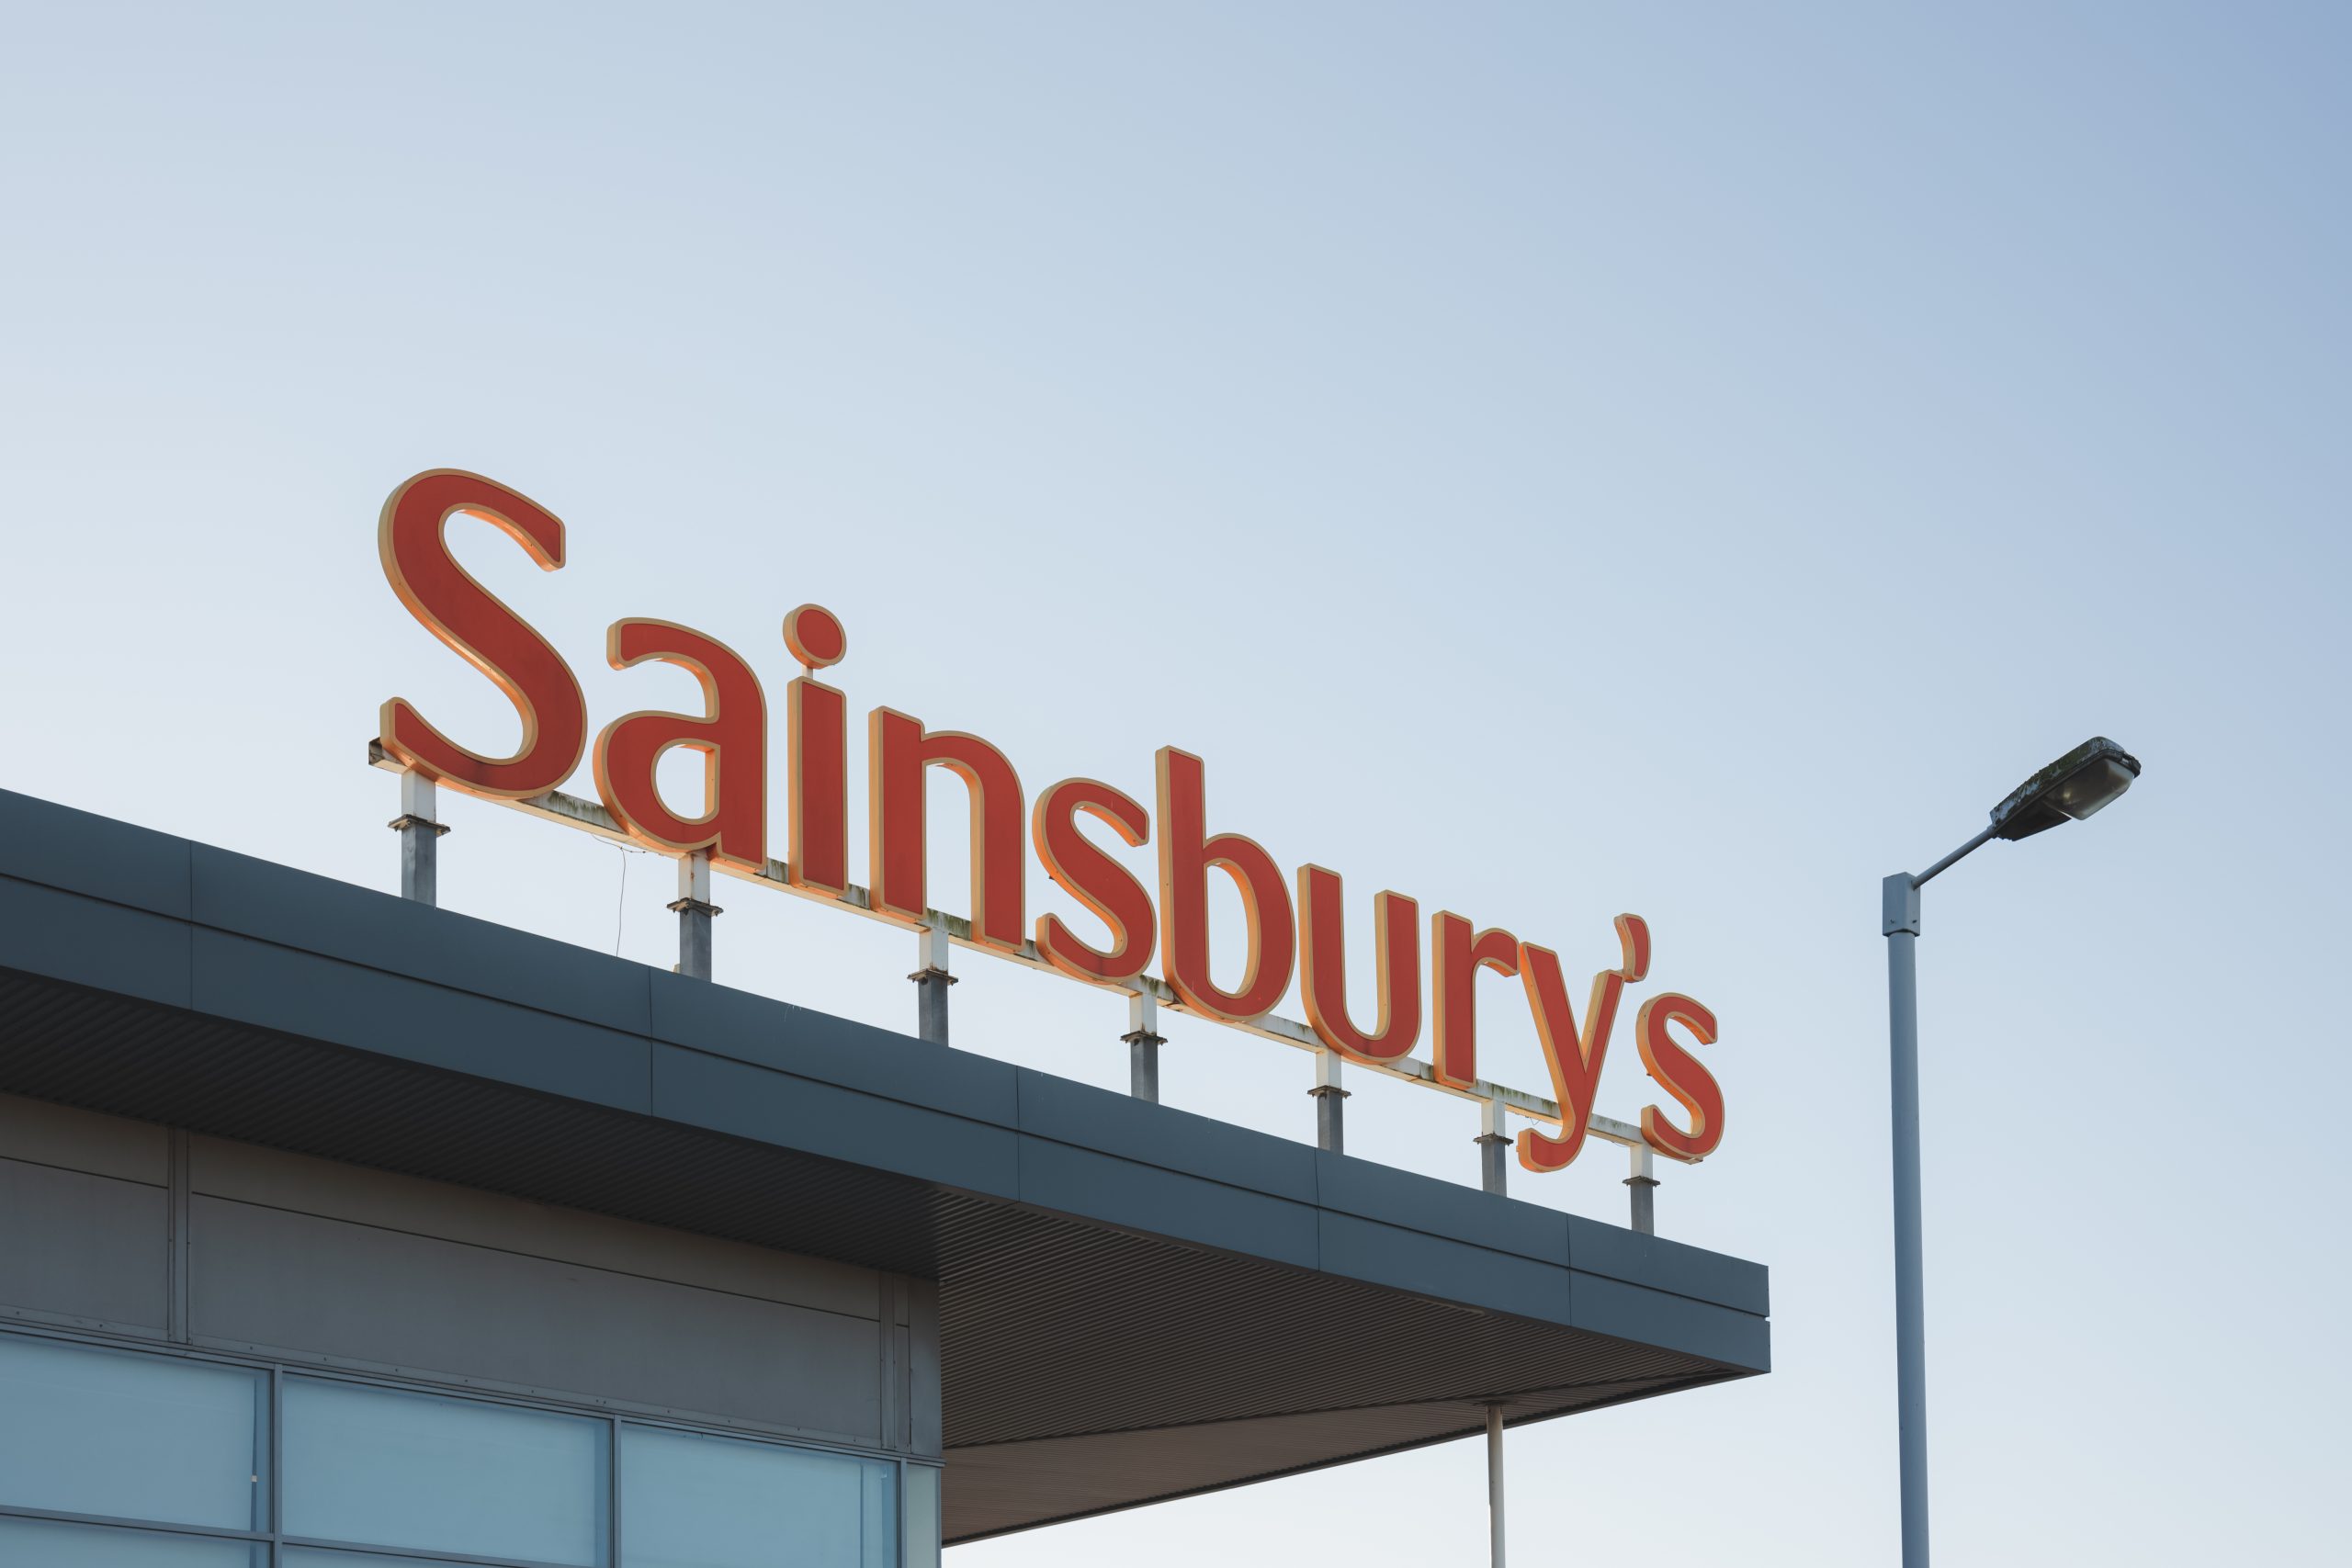 Sainsbury’s eyes up £1bn cost savings in new strategy update